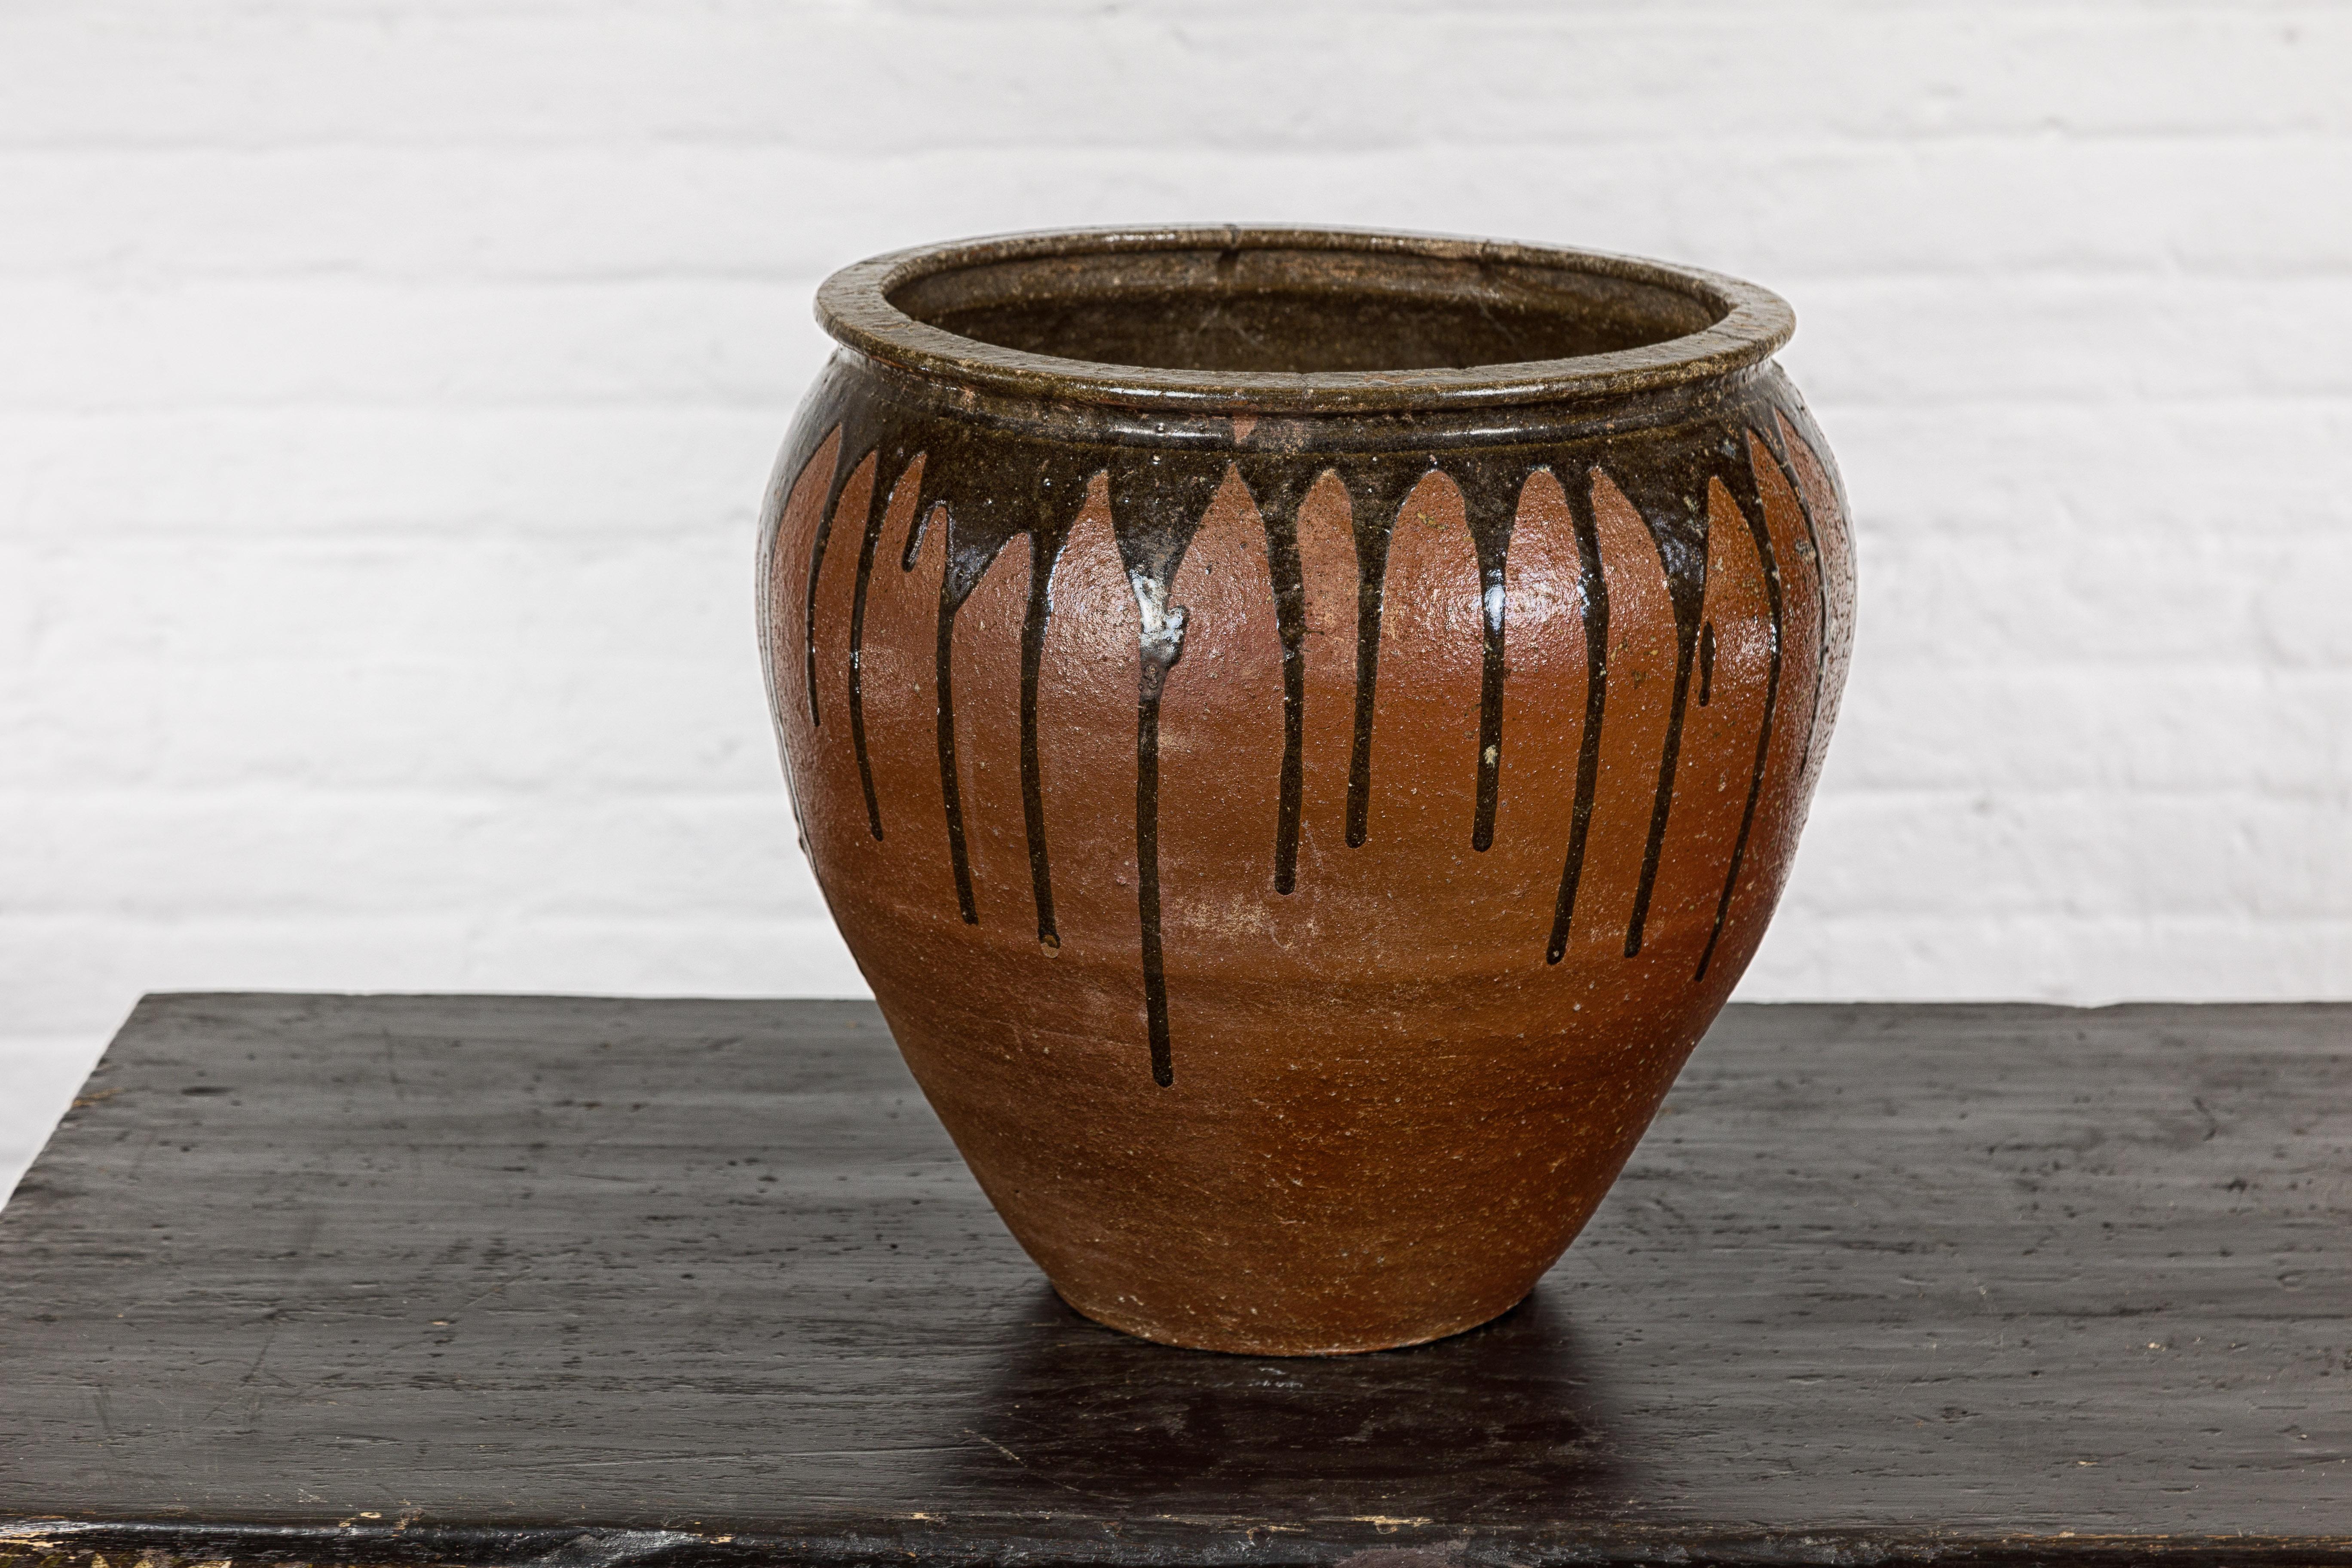 Japanese Tamba Ware Brown Glazed Ceramic Salt Pot Planter with Dripping For Sale 8